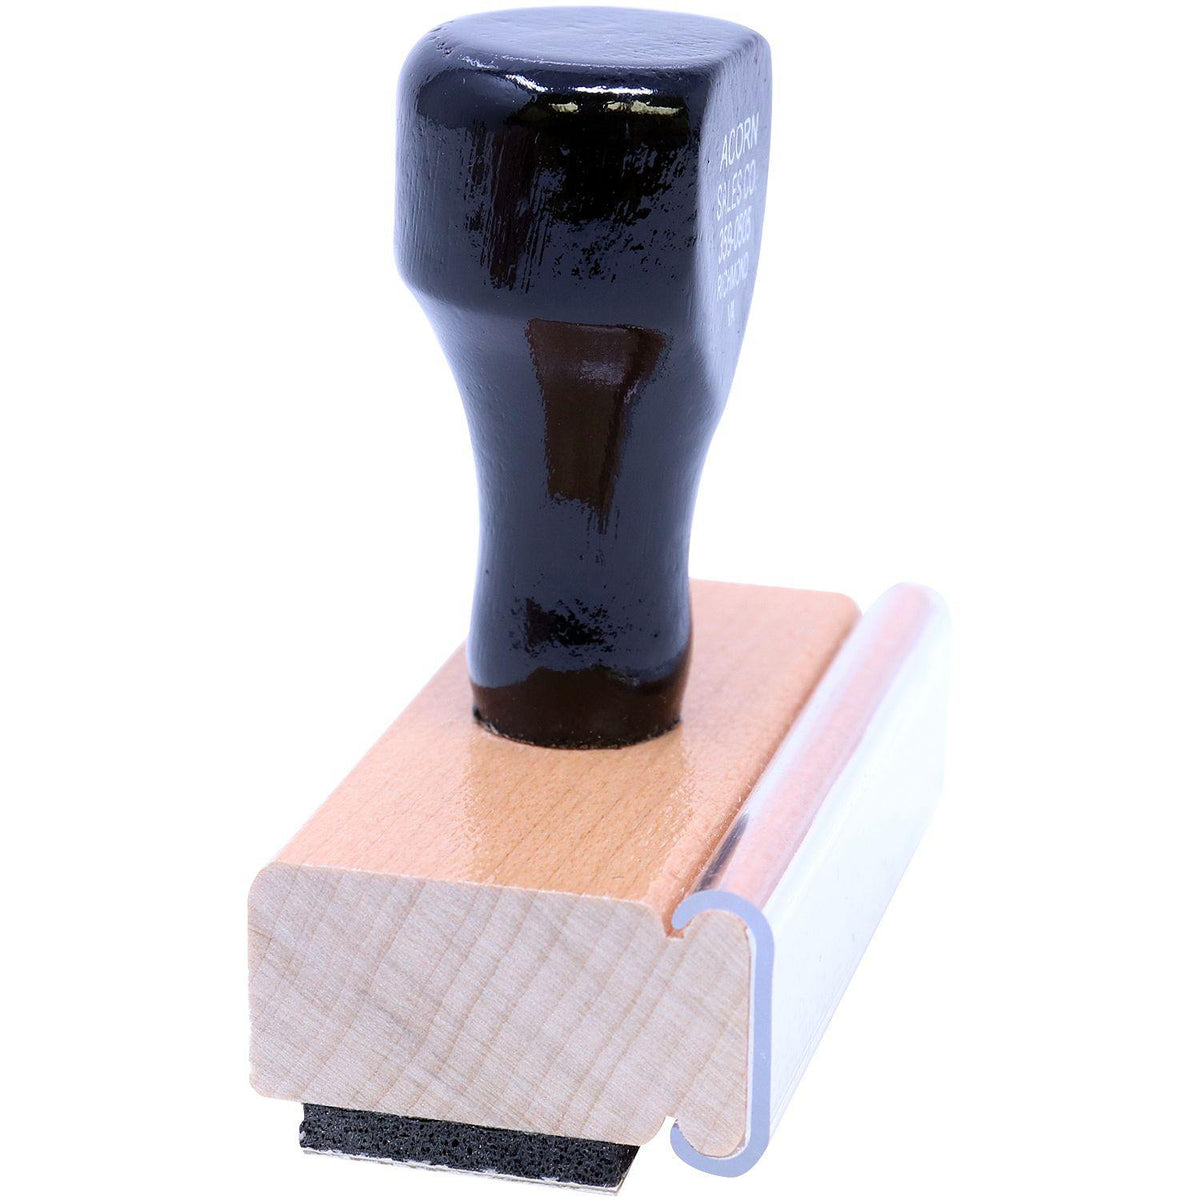 Side View of Check Your Work Rubber Stamp at an Angle